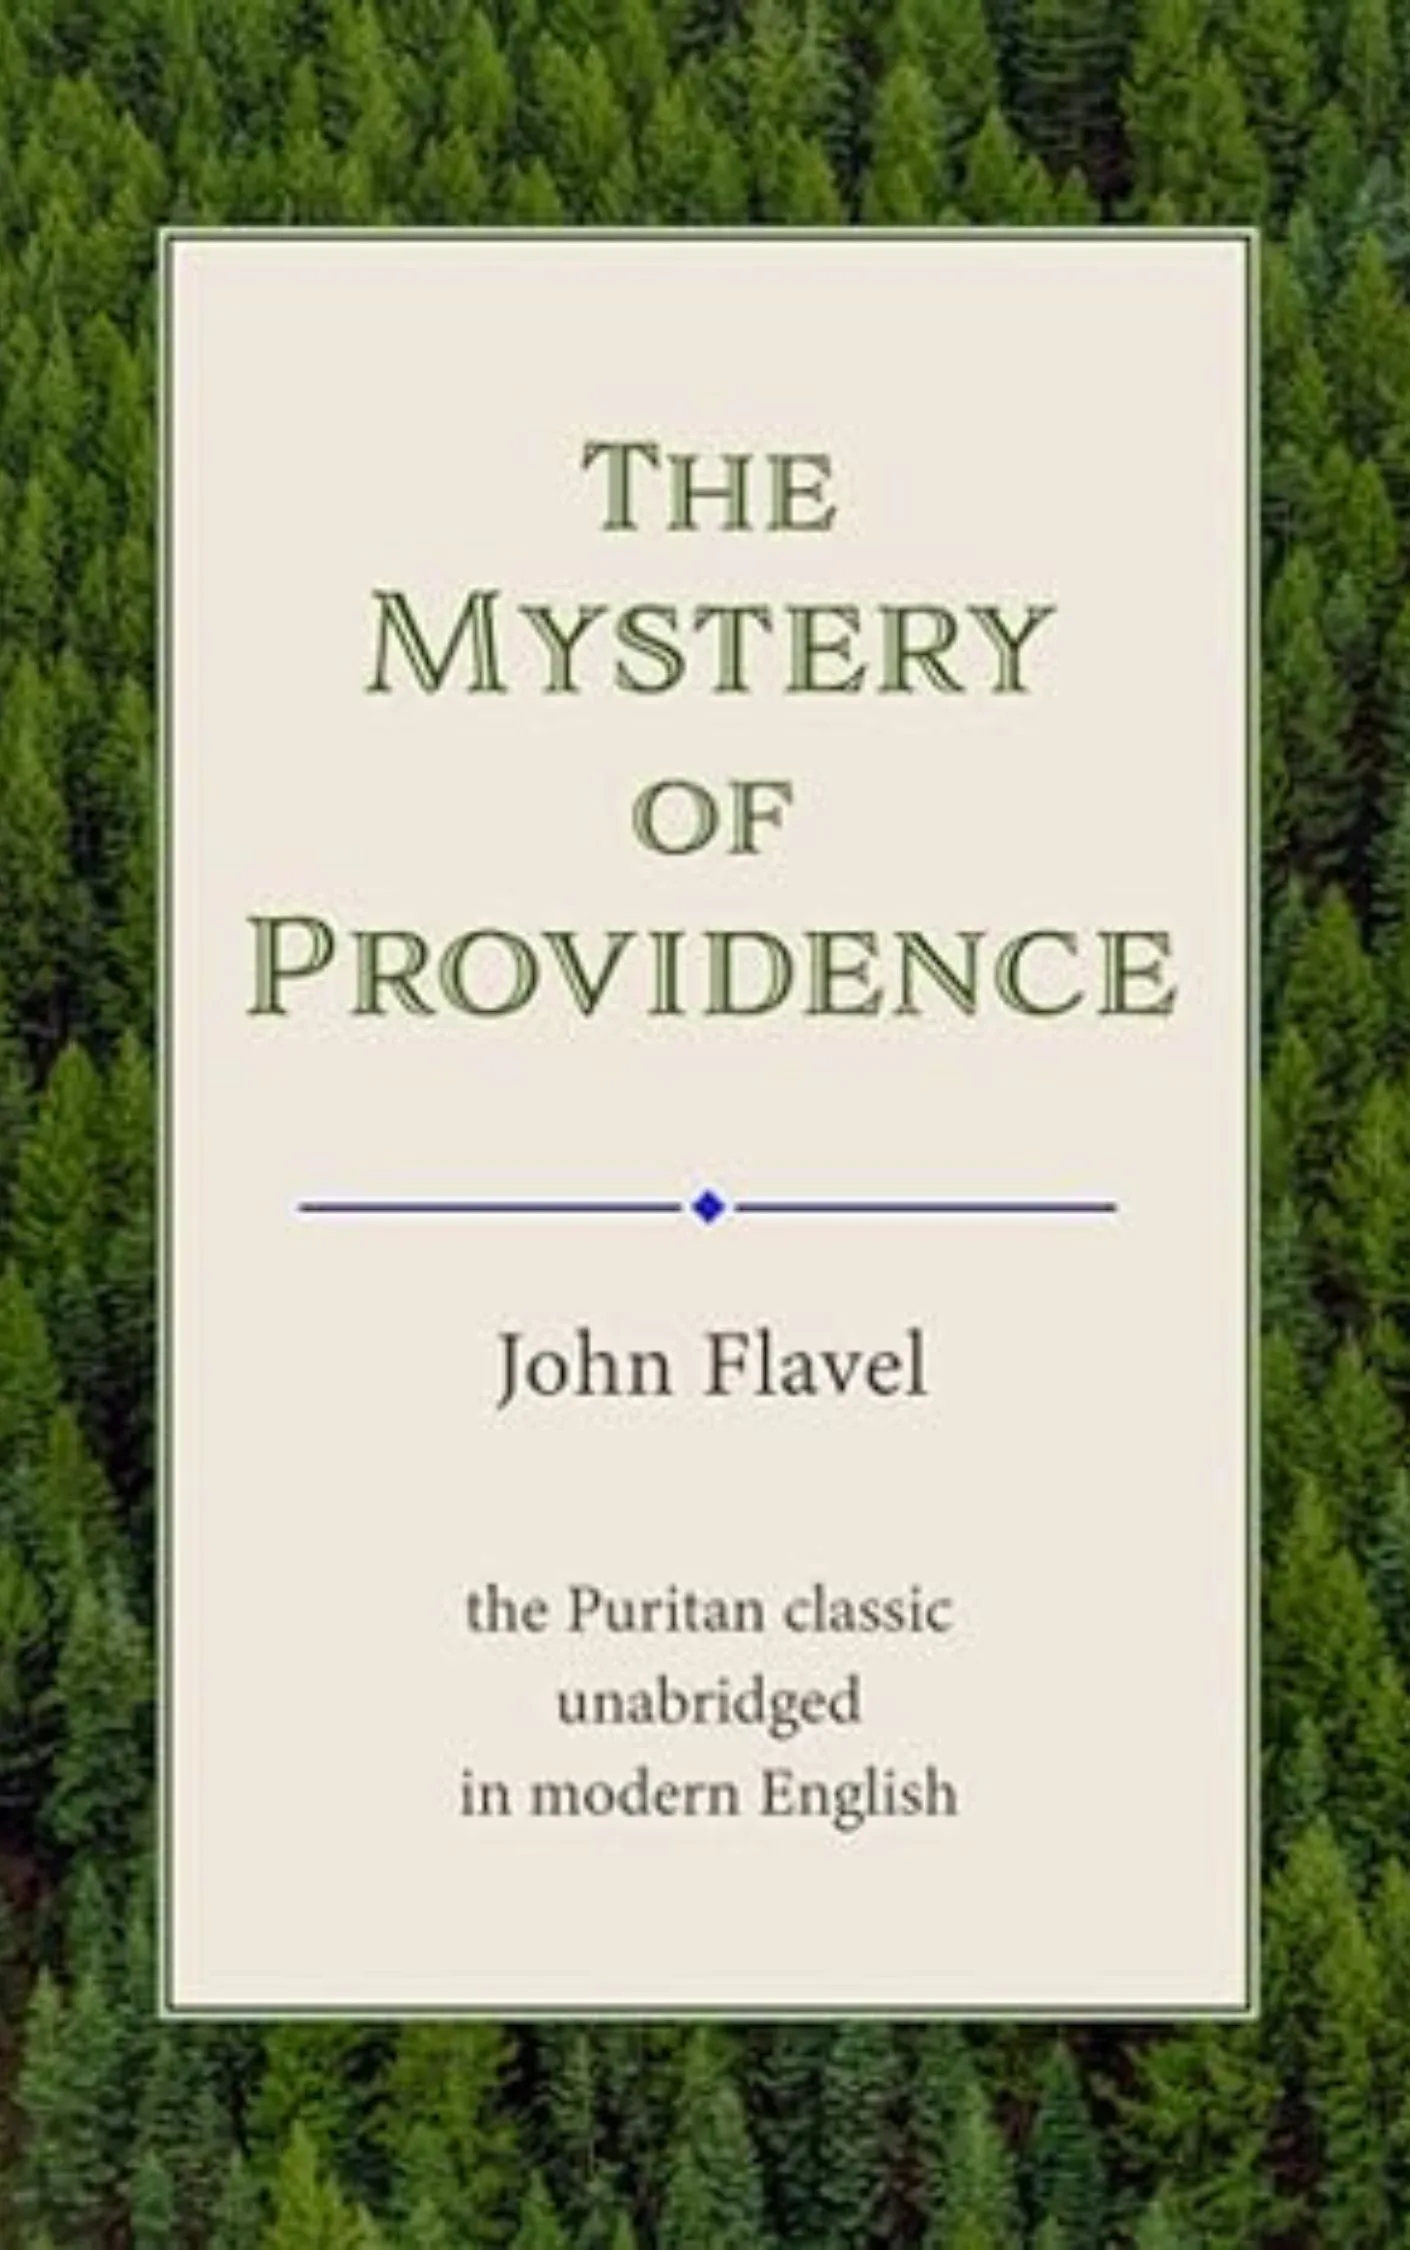 The Mystery of Providence by John Flavel